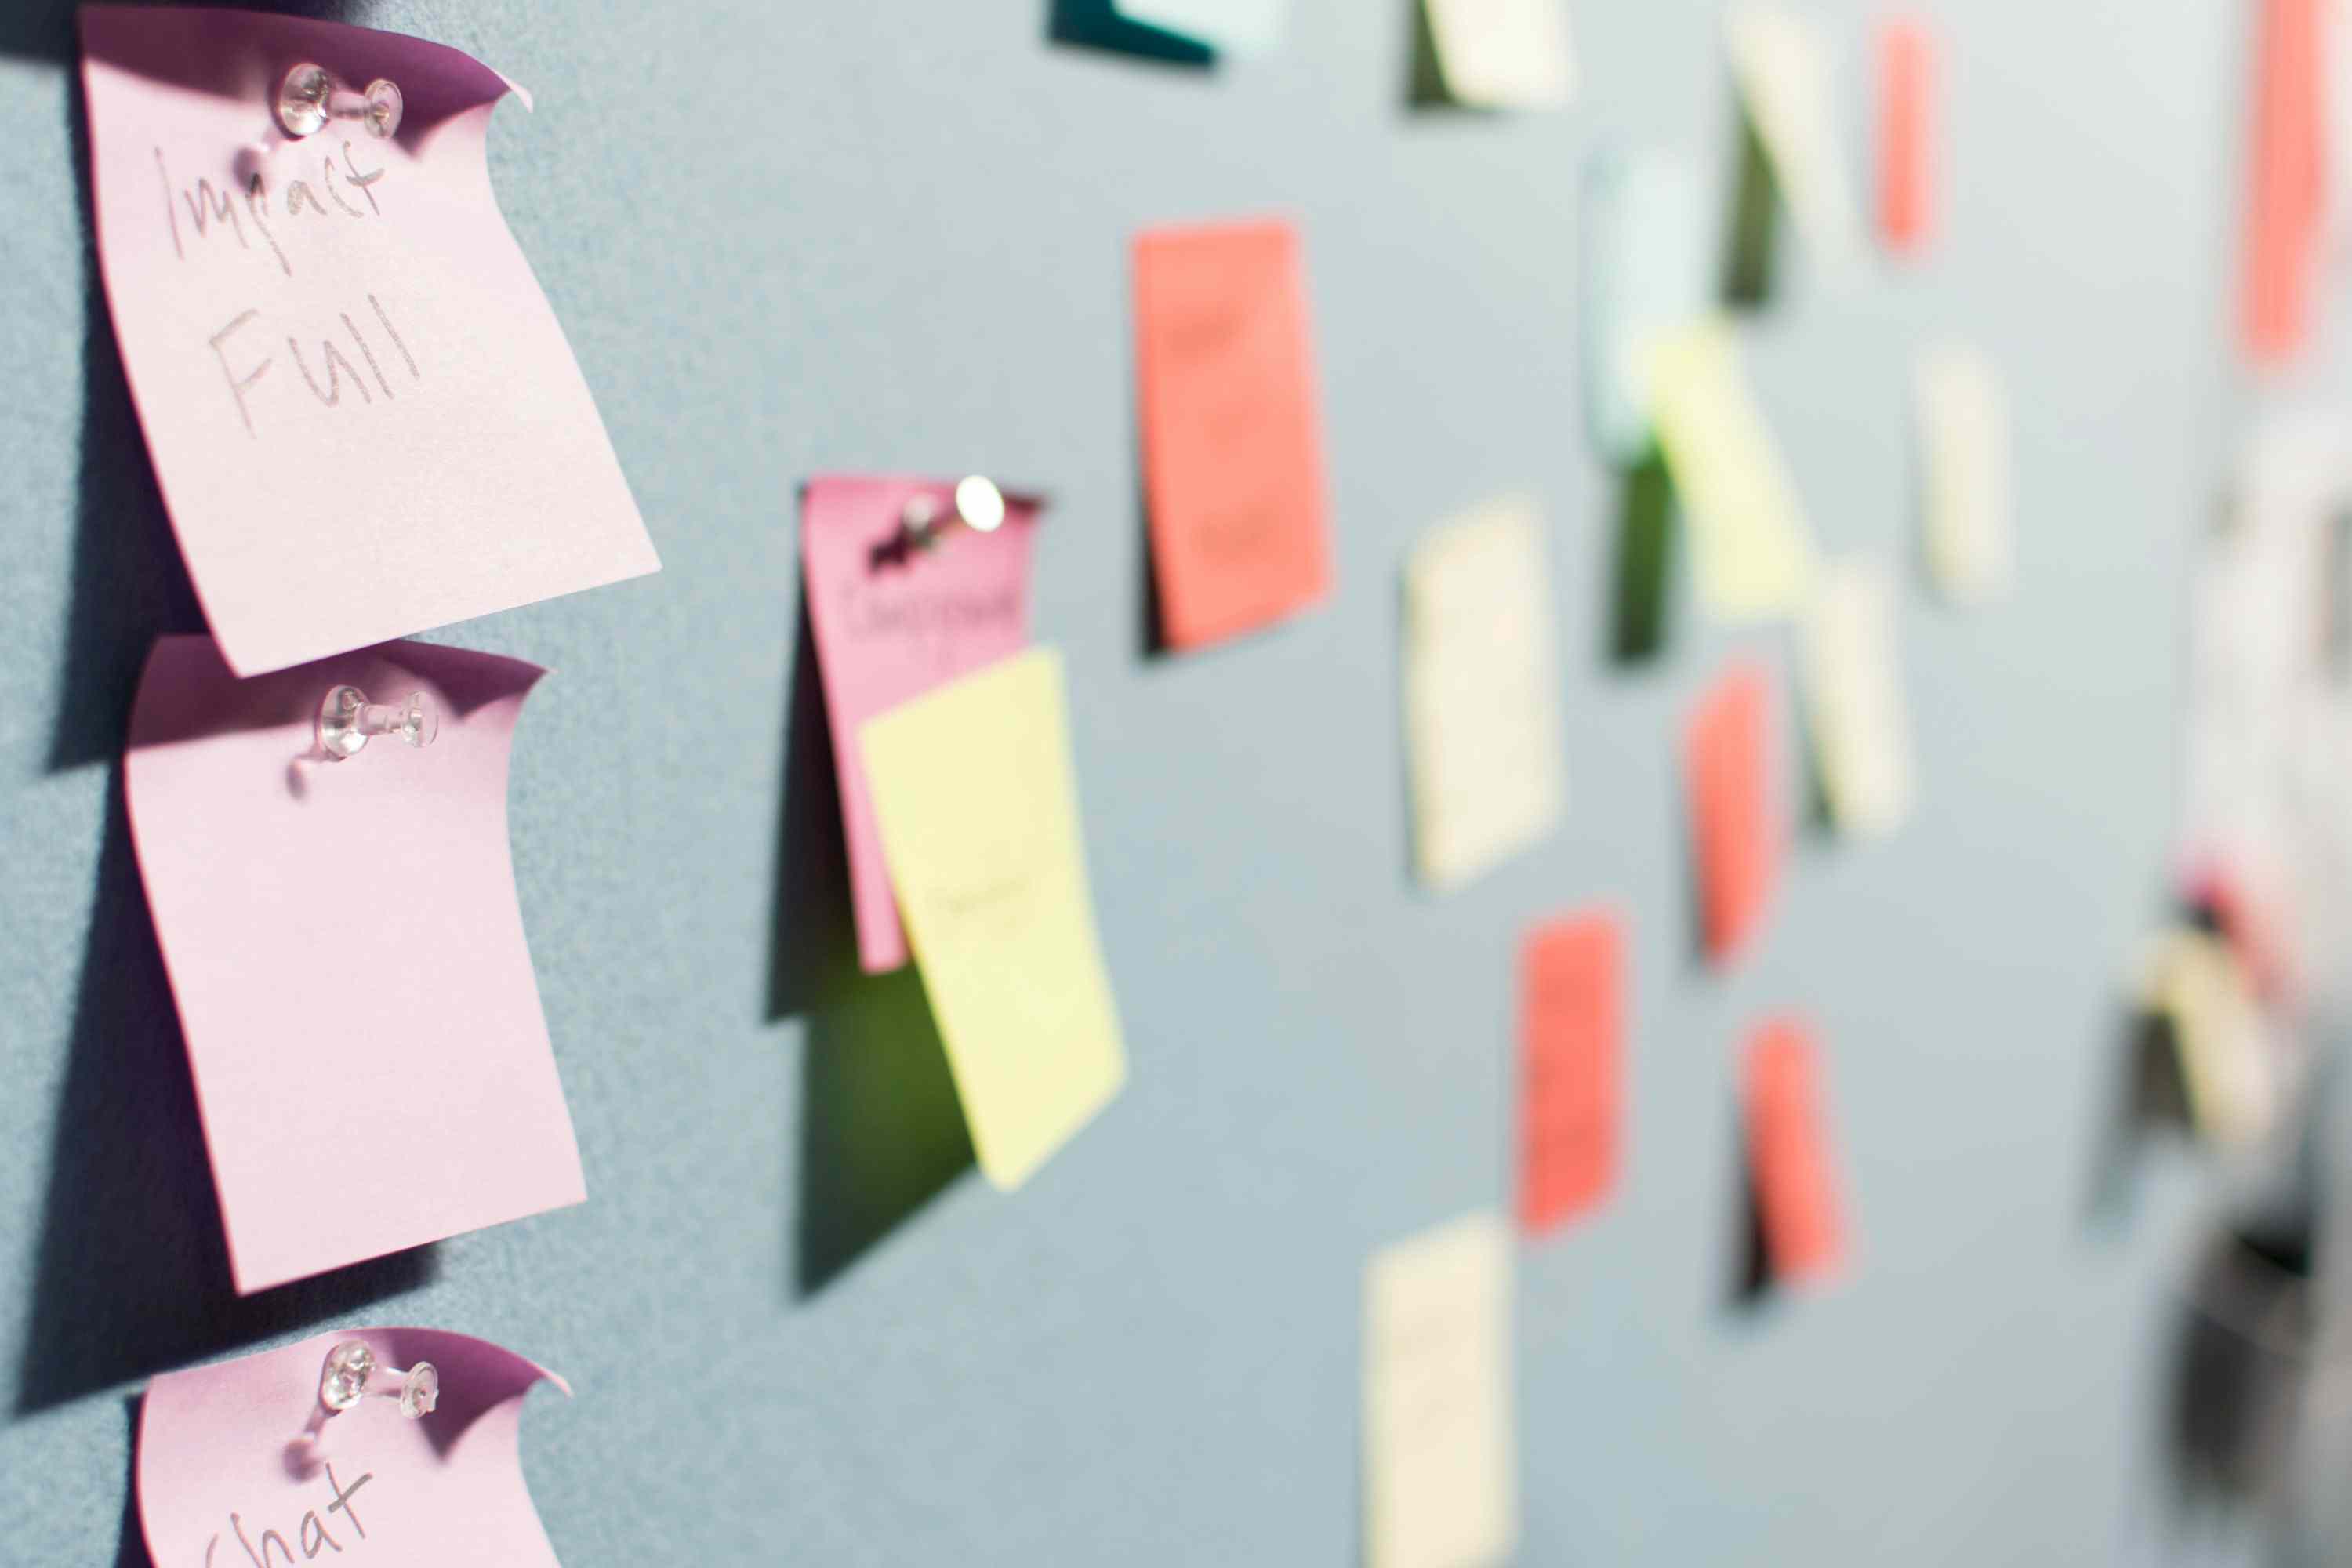 An array of post-it notes on a board for a strategy or planning meeting